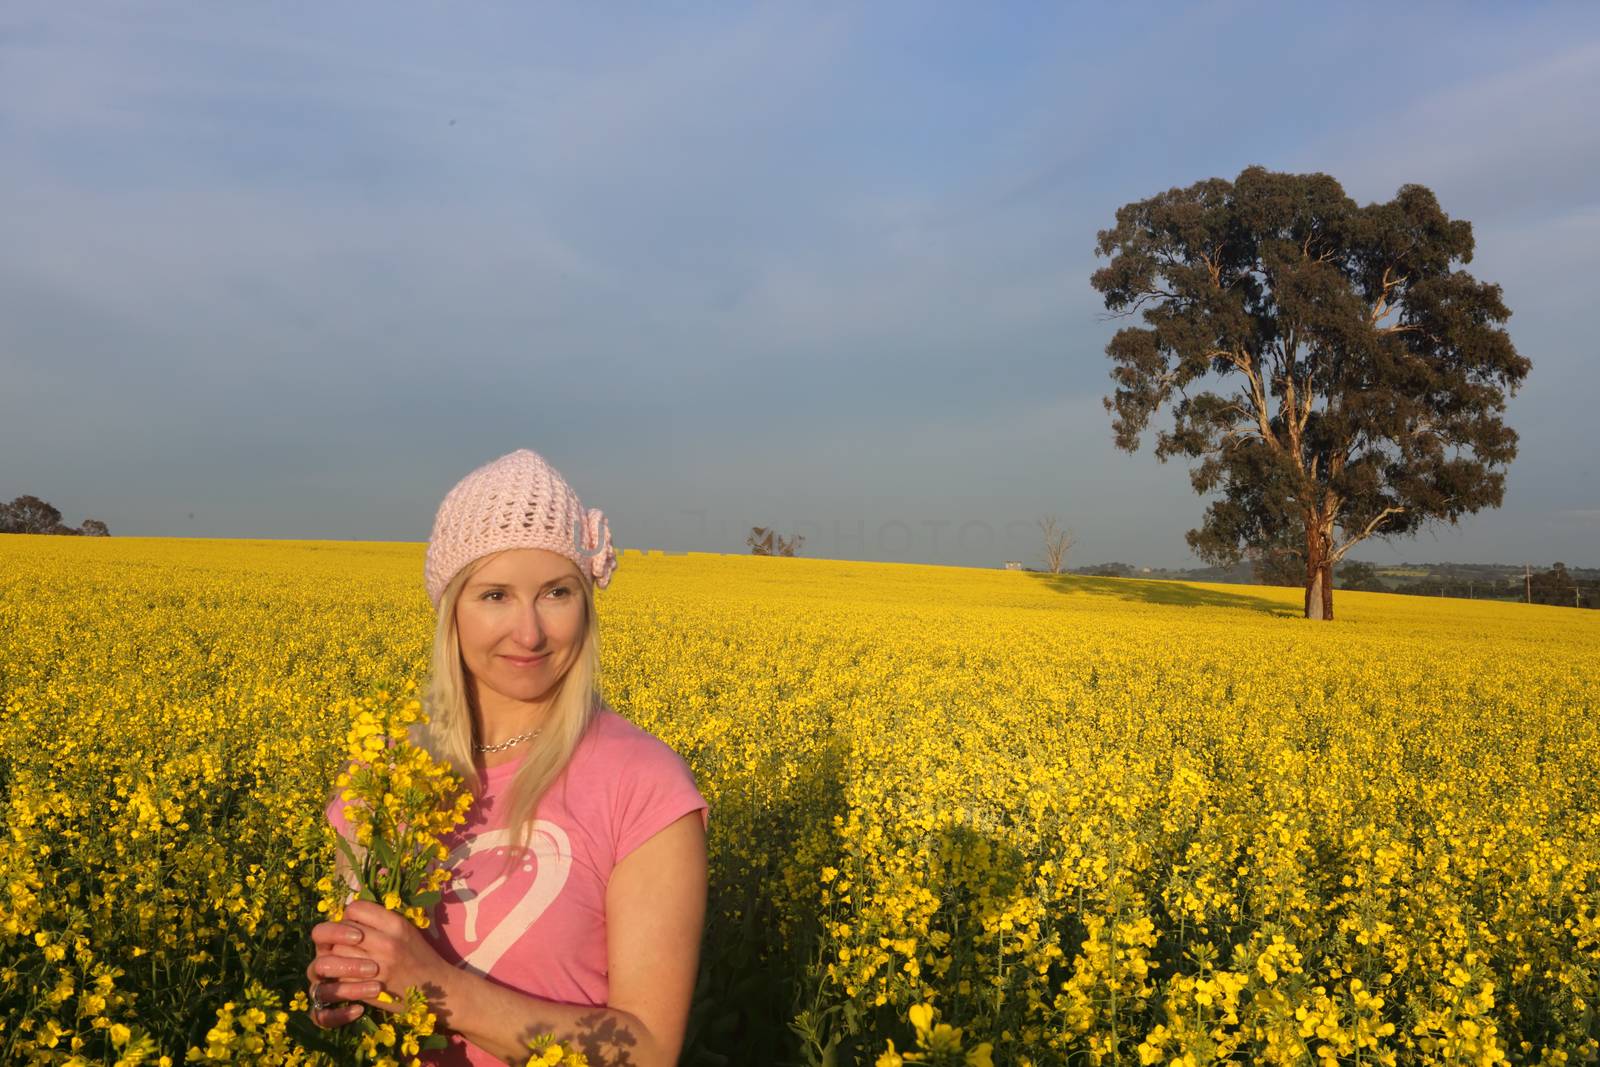 Smiling woman standing in a field of golden flowering canola rapeseed farmland in early morning sunlight